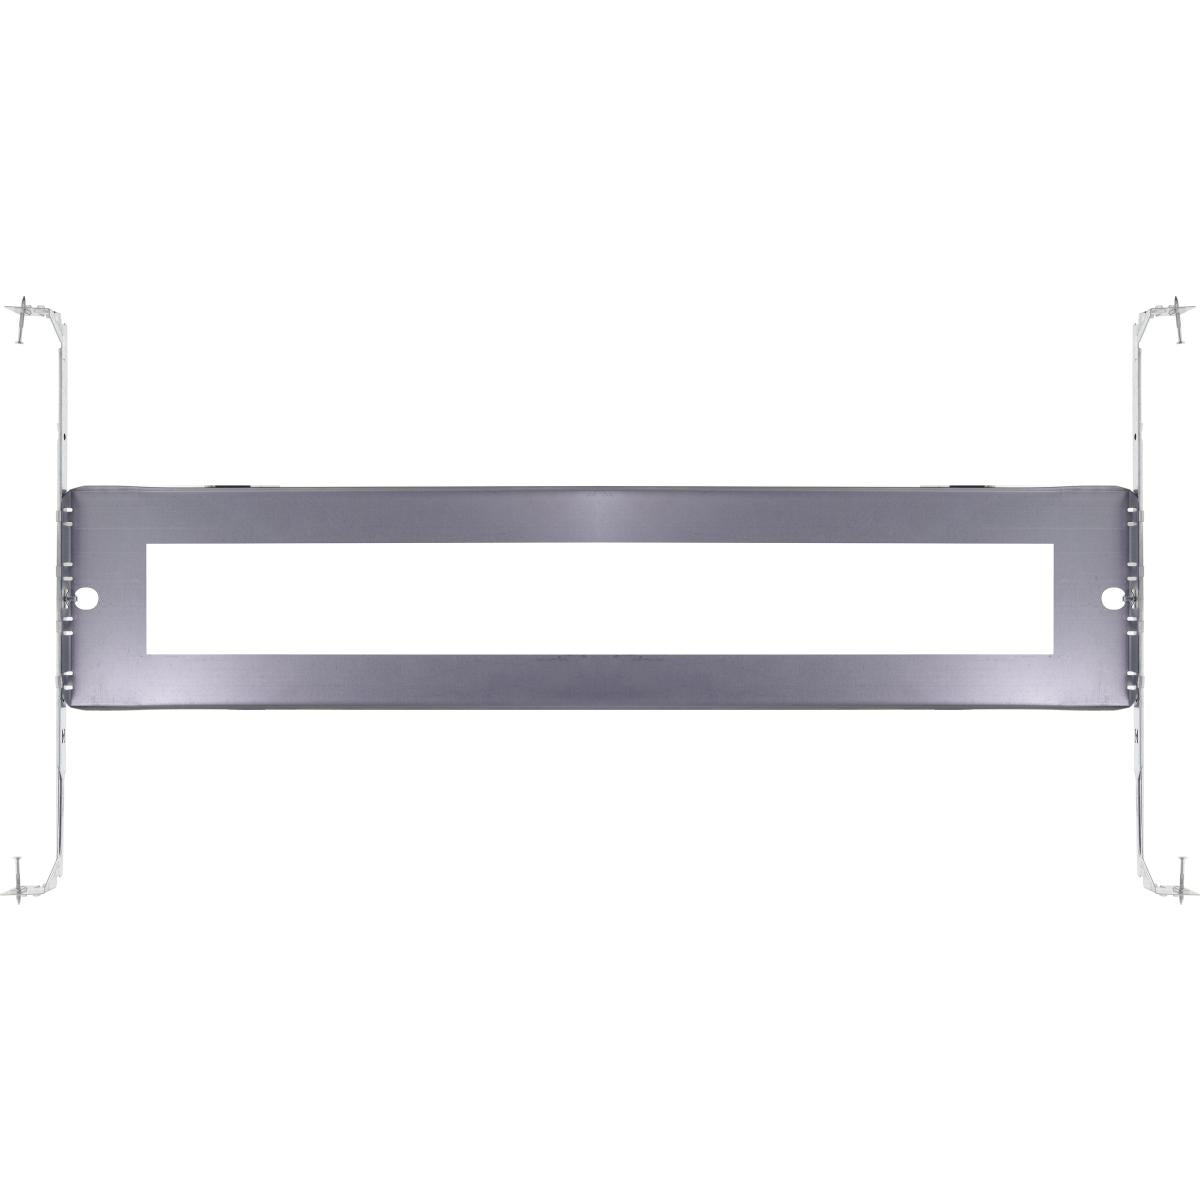 Satco 80-962 12 in. Linear Rough-in Plate for 12 in. LED Direct Wire Linear Downlight